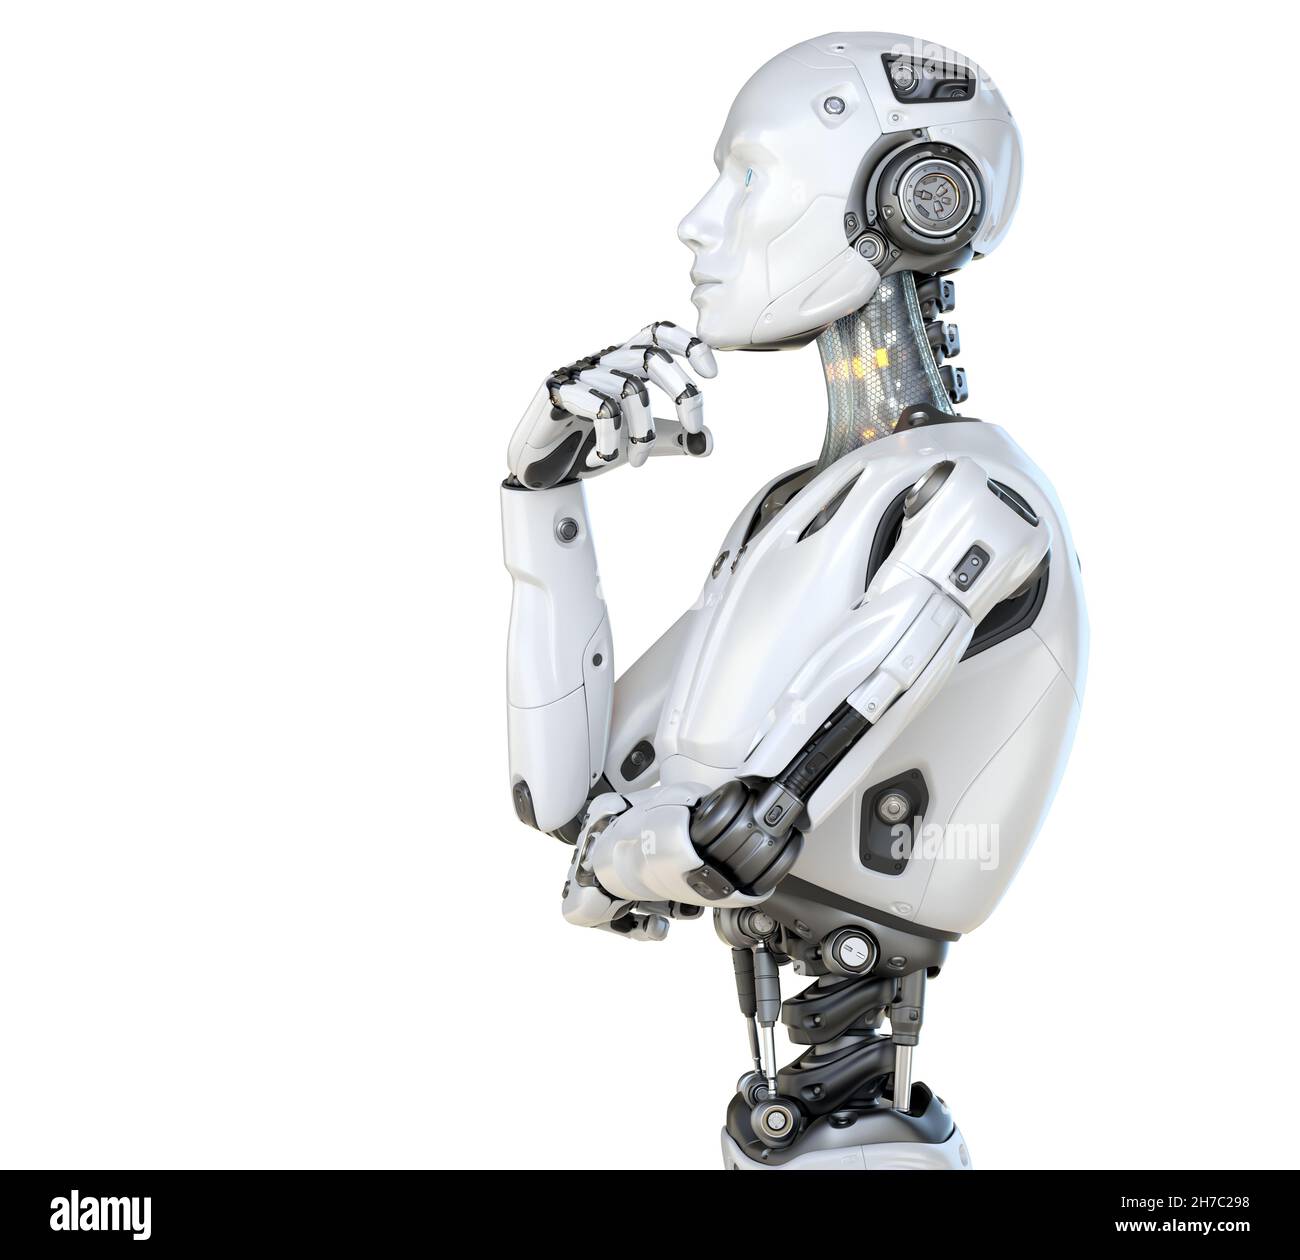 Human like a robot in a pensive posture. Isolated. 3D illustration Stock Photo